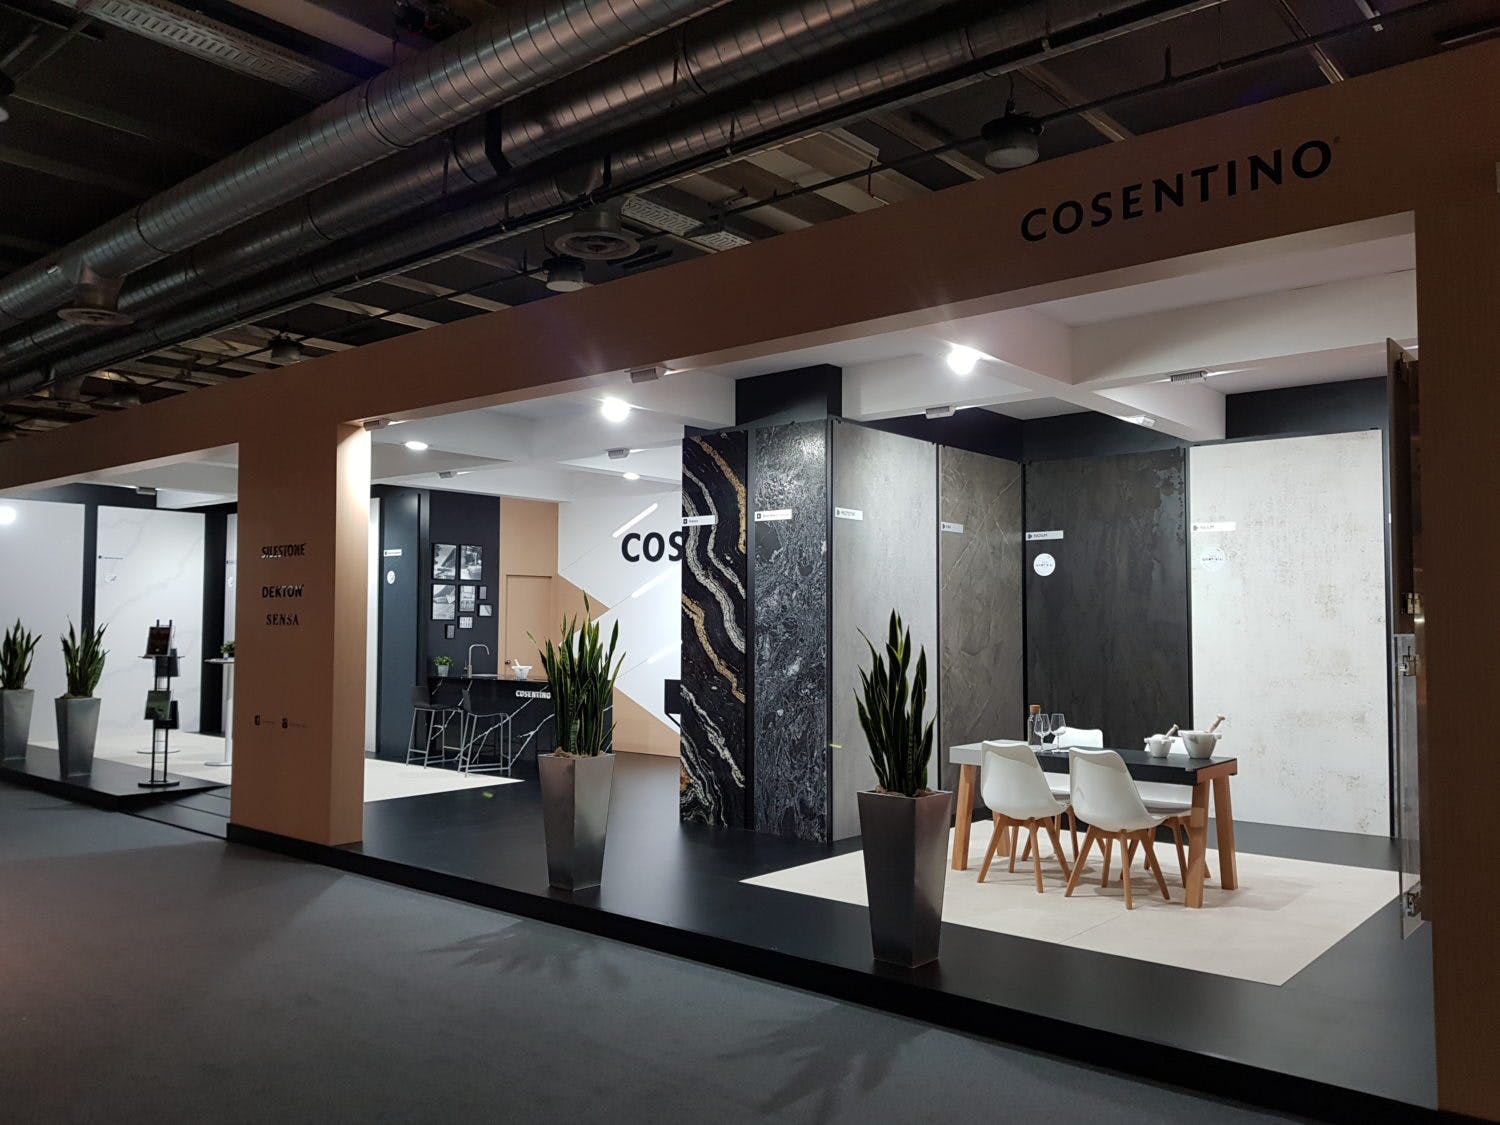 Image 33 of Cosentino stand in Swissbau 2018 1500x1125 3 in Cosentino presents its novelties at Swissbau and at IDS - Cosentino